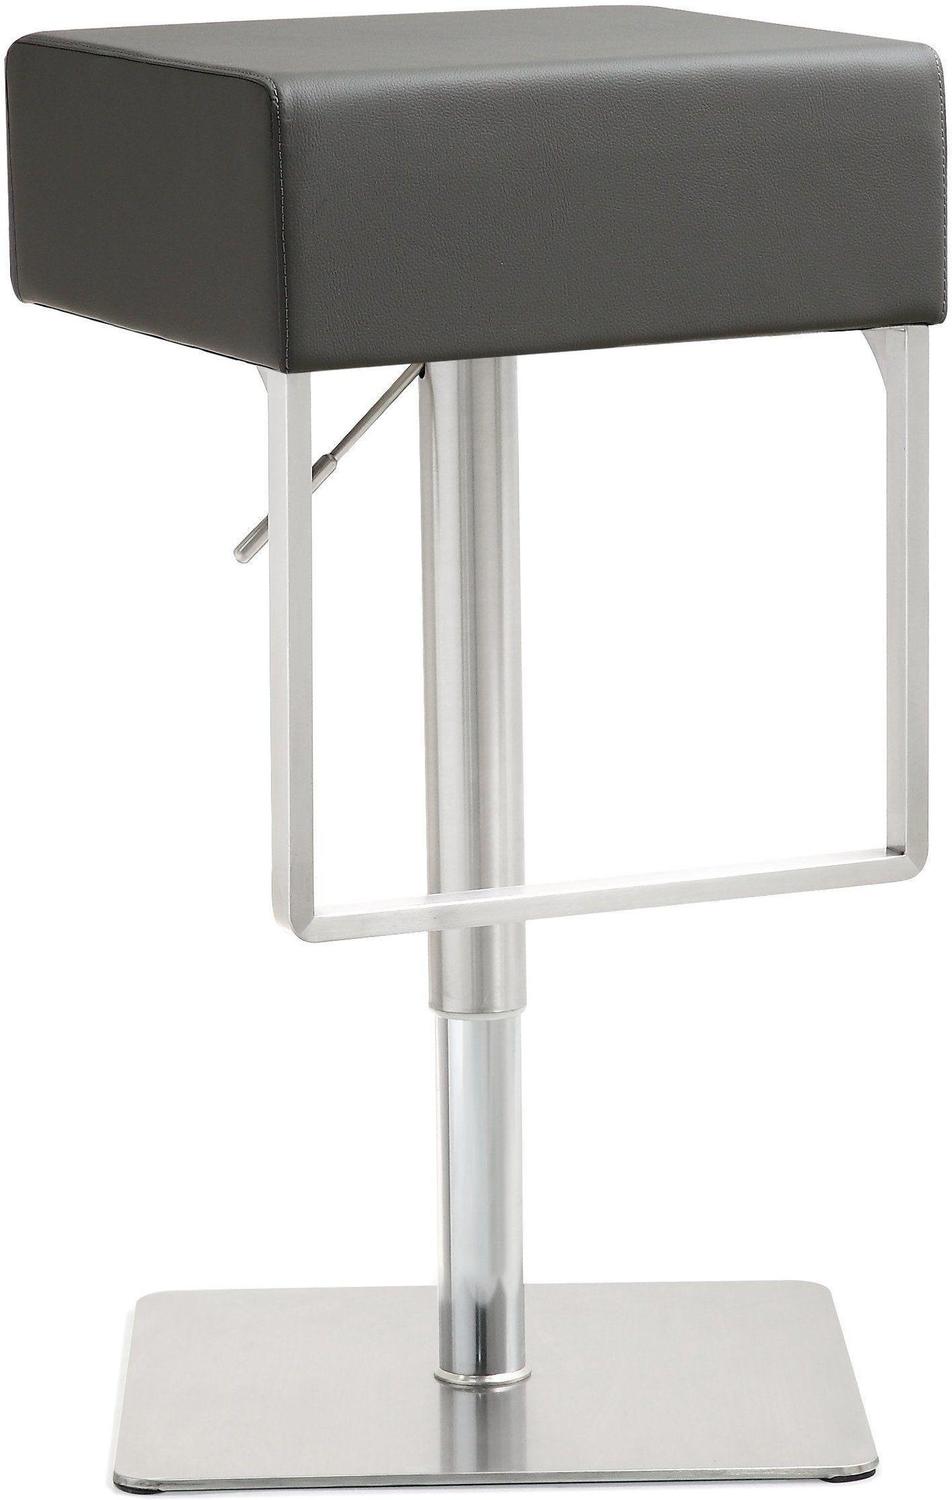 bar stool height high chair Contemporary Design Furniture Stools Grey